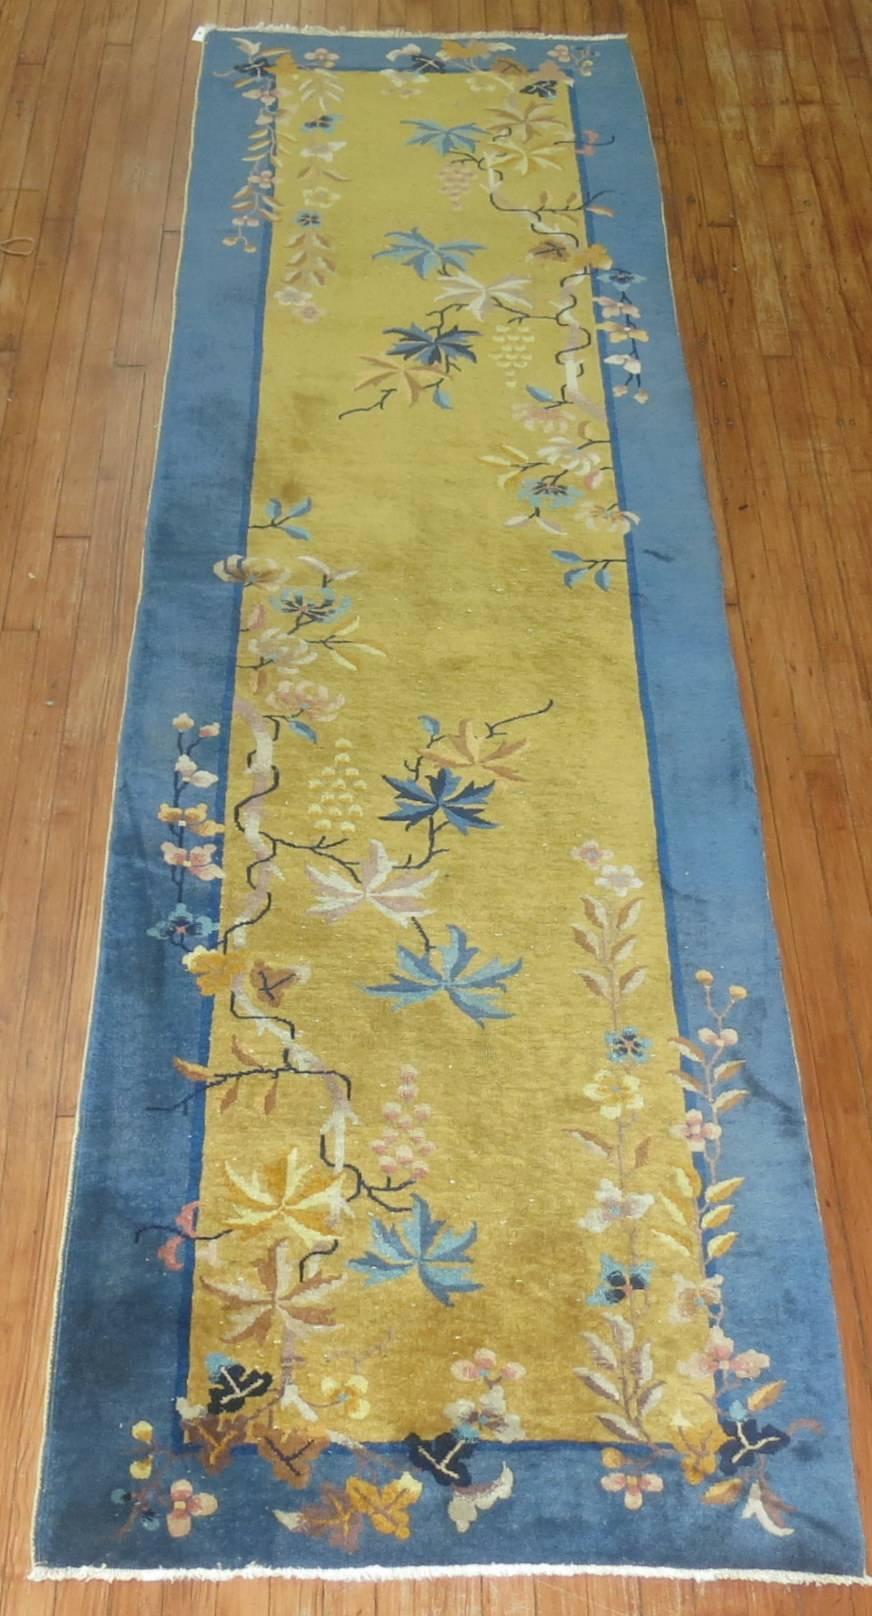 Beautiful Chinese Art Deco runner with a mustard yellow field and medium blue border. Chinese rugs don't often come in runners like this rare example.